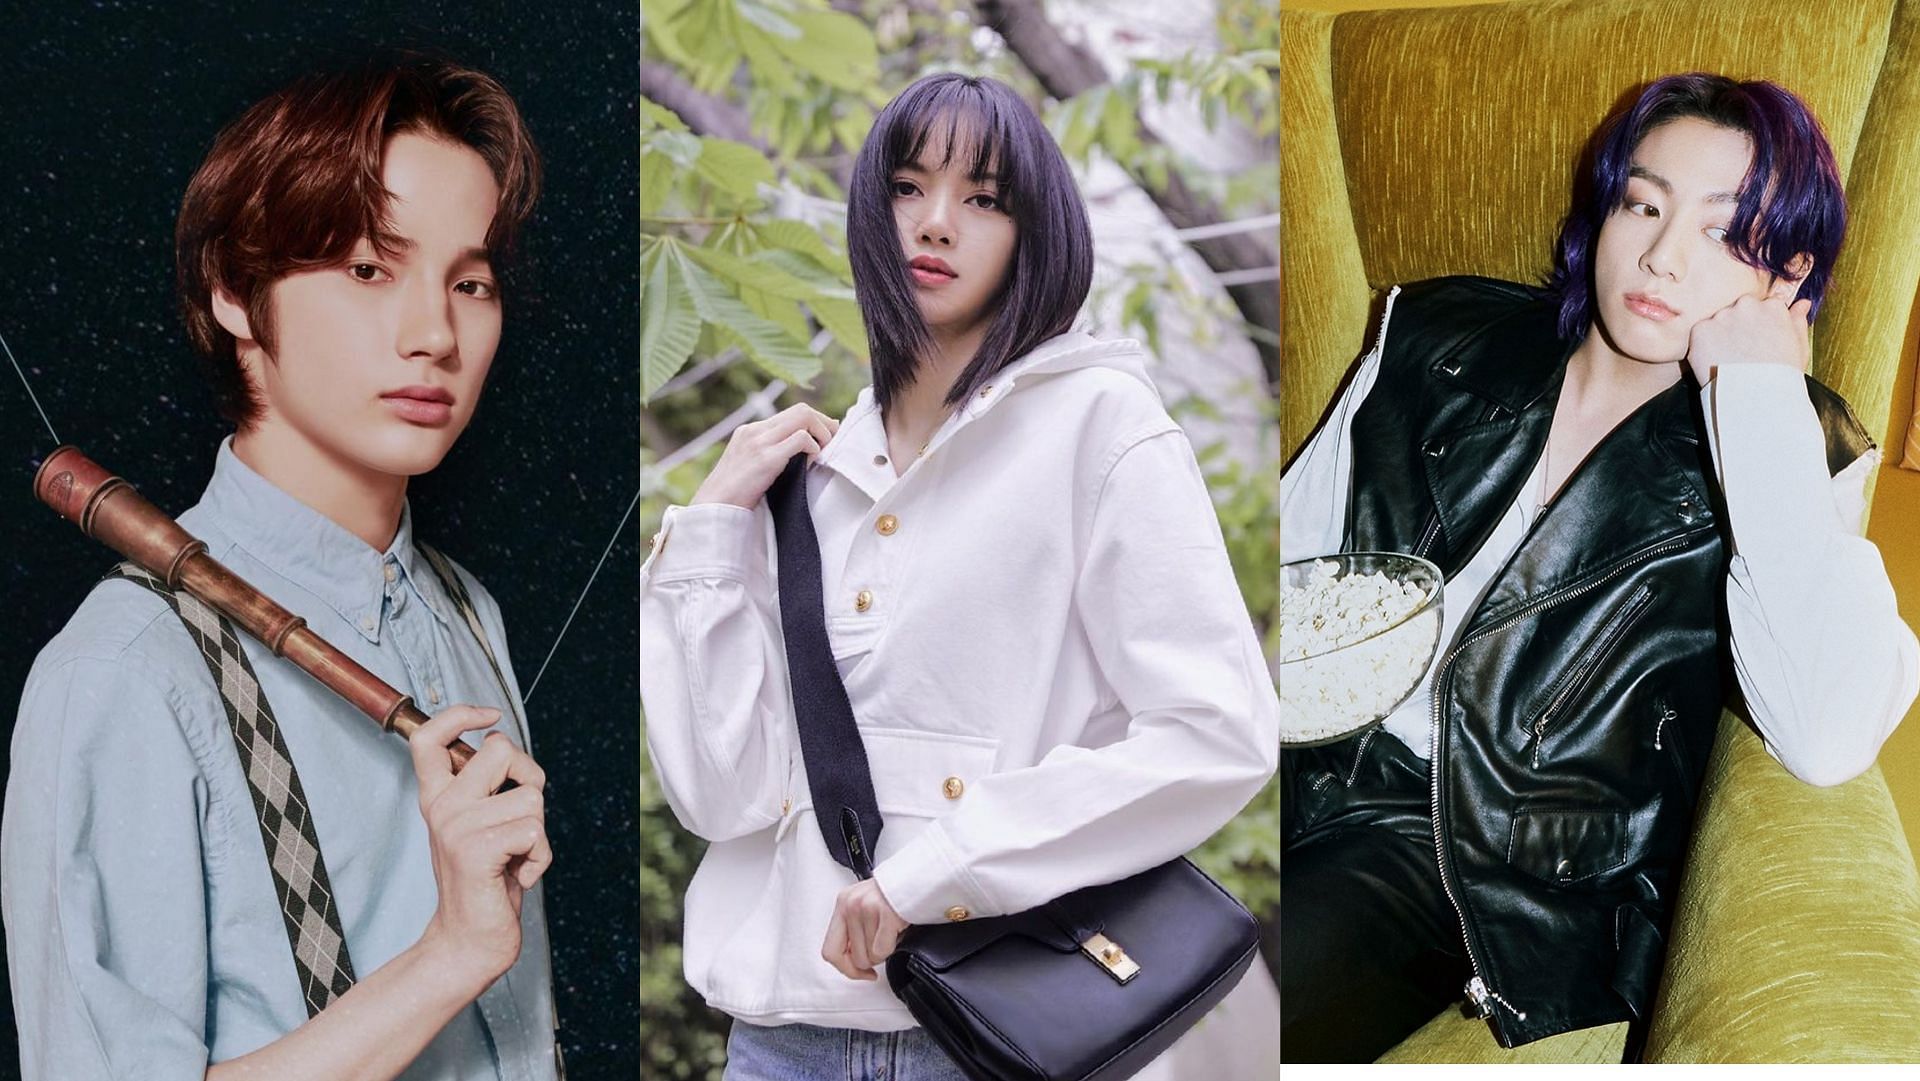 TXT&#039;s Huening Kai, BLACKPINK&#039;s LISA and BTS&#039; Jung Kook are some of the K-pop maknaes who have been impressing fans with their various talents (Images via @txt_bighit @lalalalisa_m @bts.bighitofficial/Instagram)